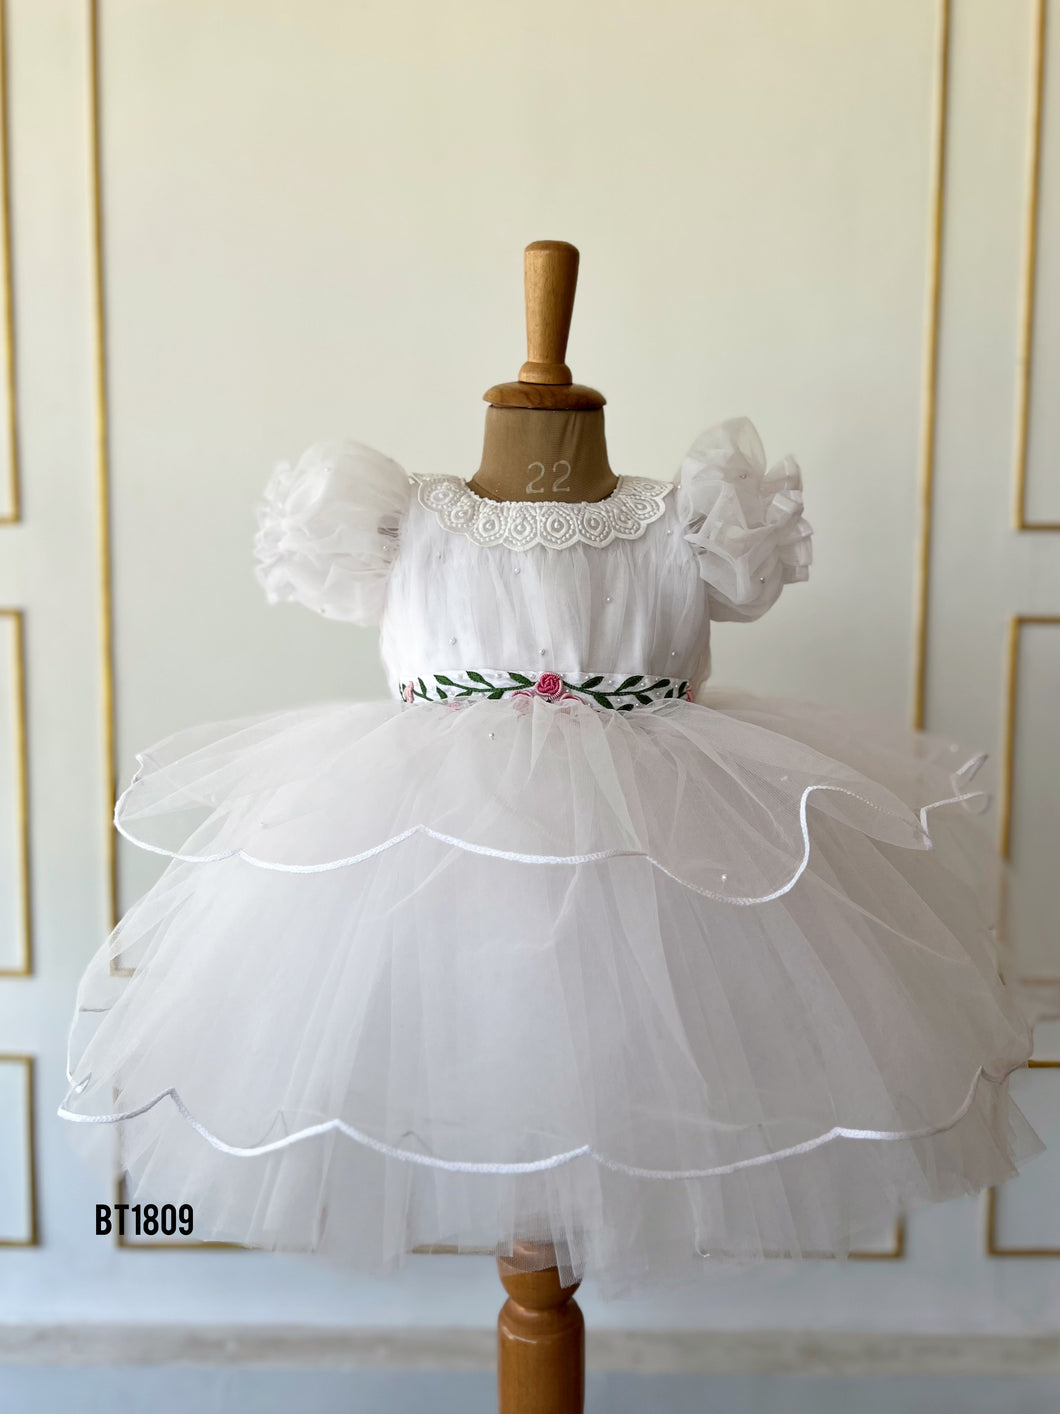 BT1809 Whispering White: An Ethereal Tulle Dress for Little Angels